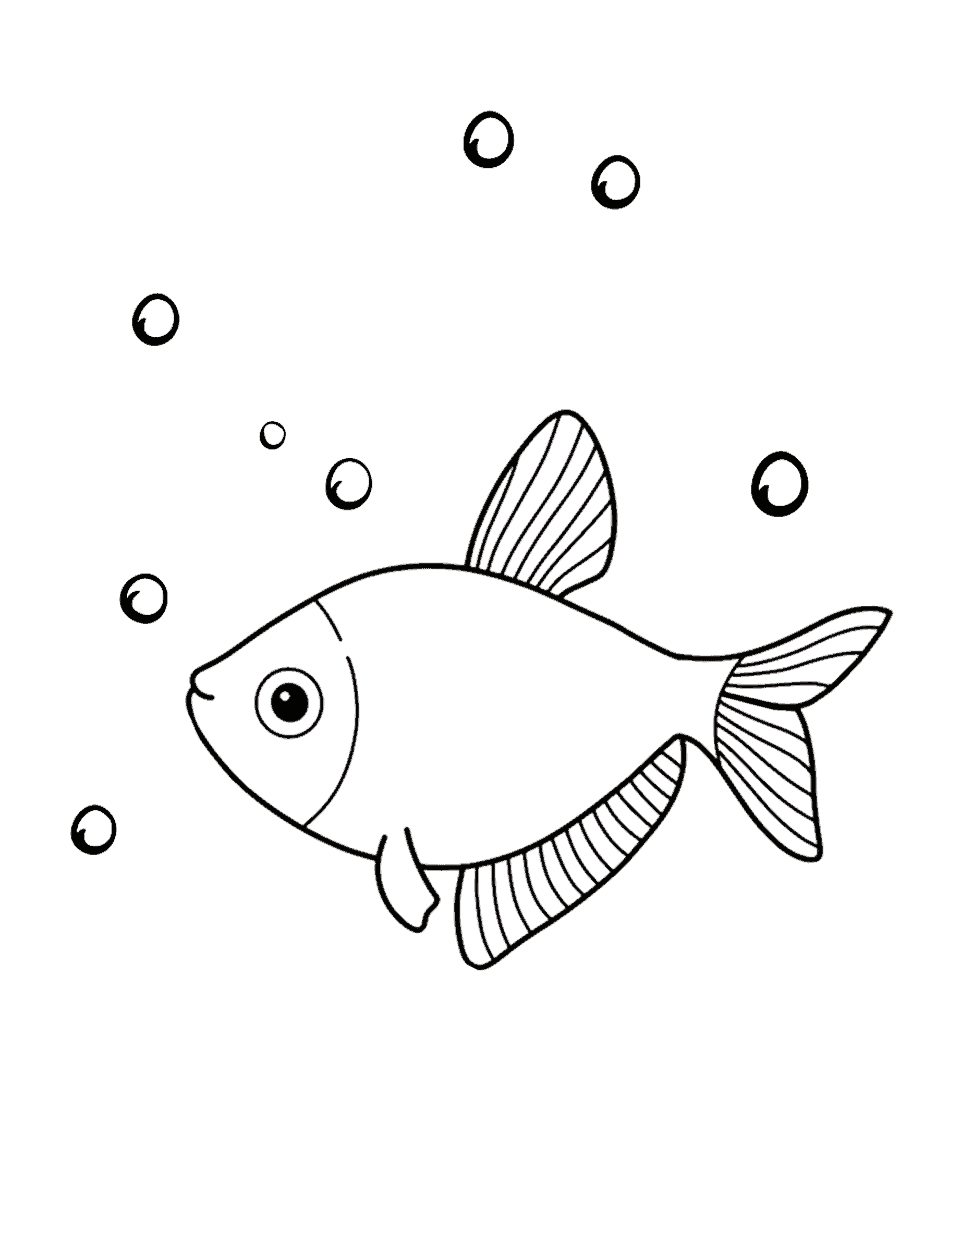 Fish in the Water Coloring Page - A simple scene of fish swimming in the water.